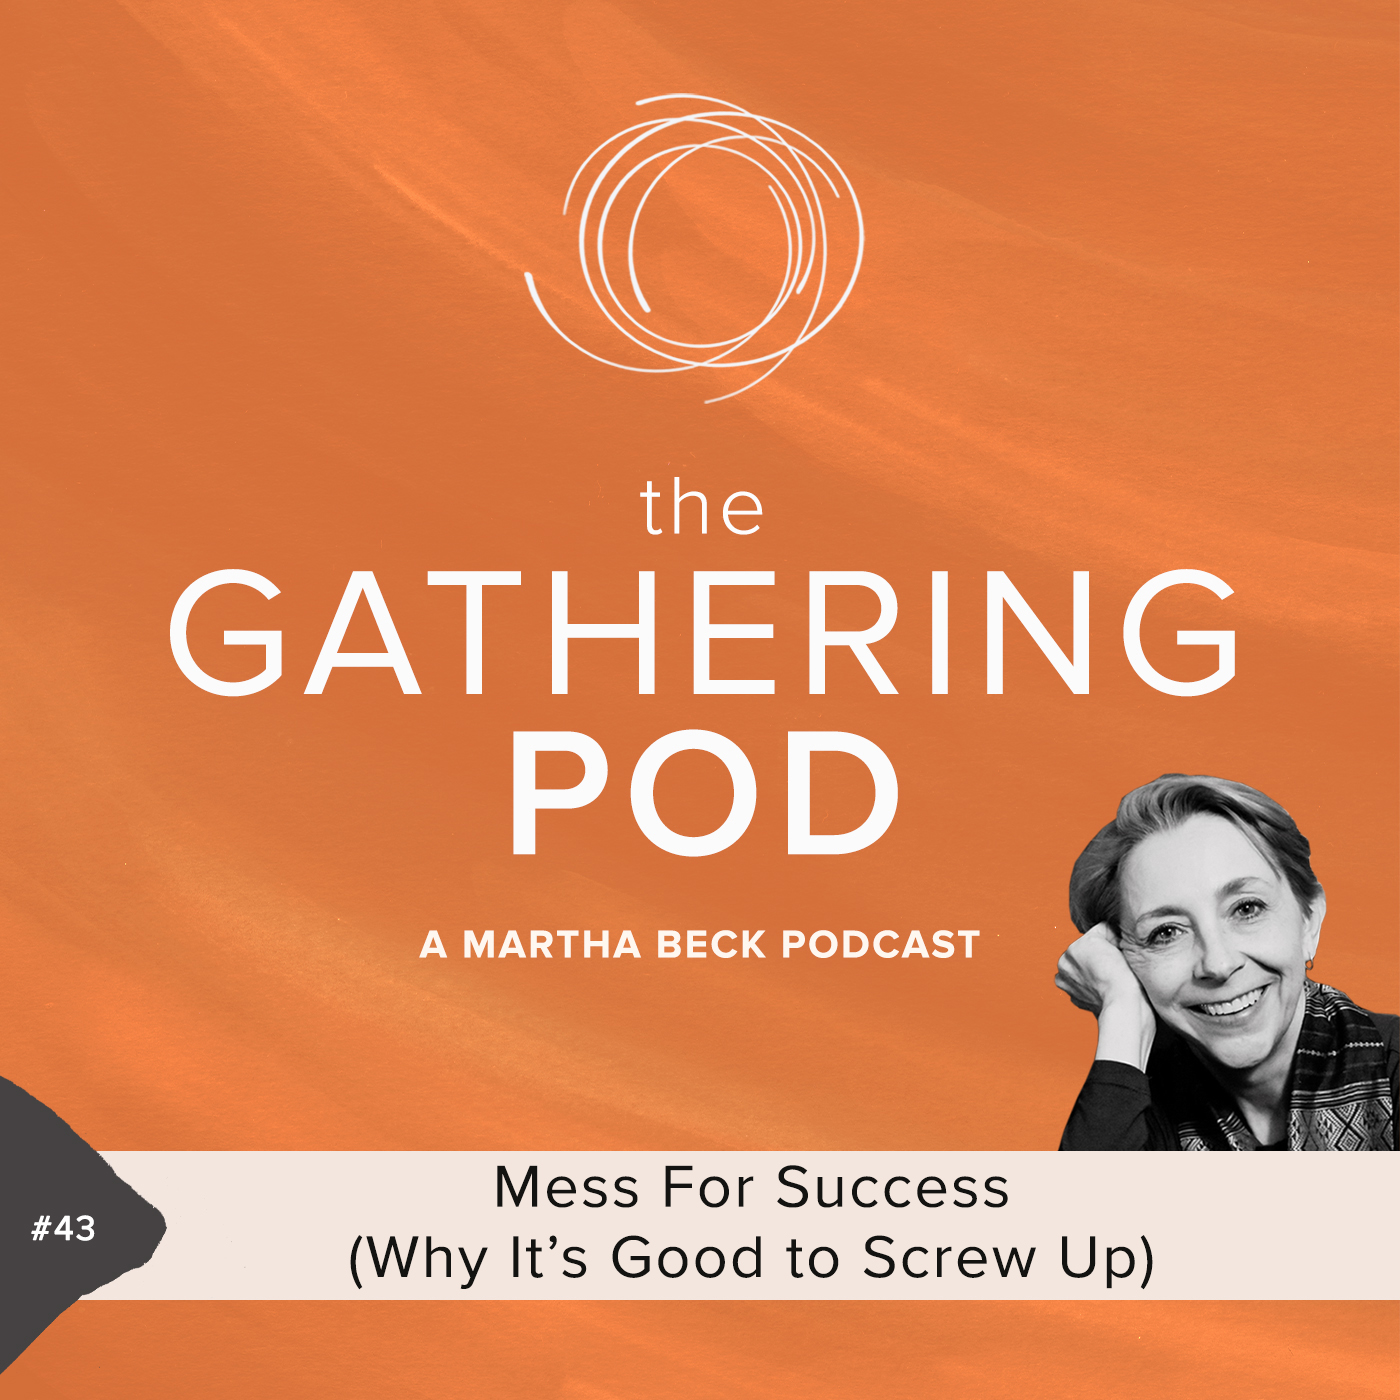 Image for The Gathering Pod A Martha Beck Podcast Episode #43 Mess For Success (Why It’s Good to Screw Up)